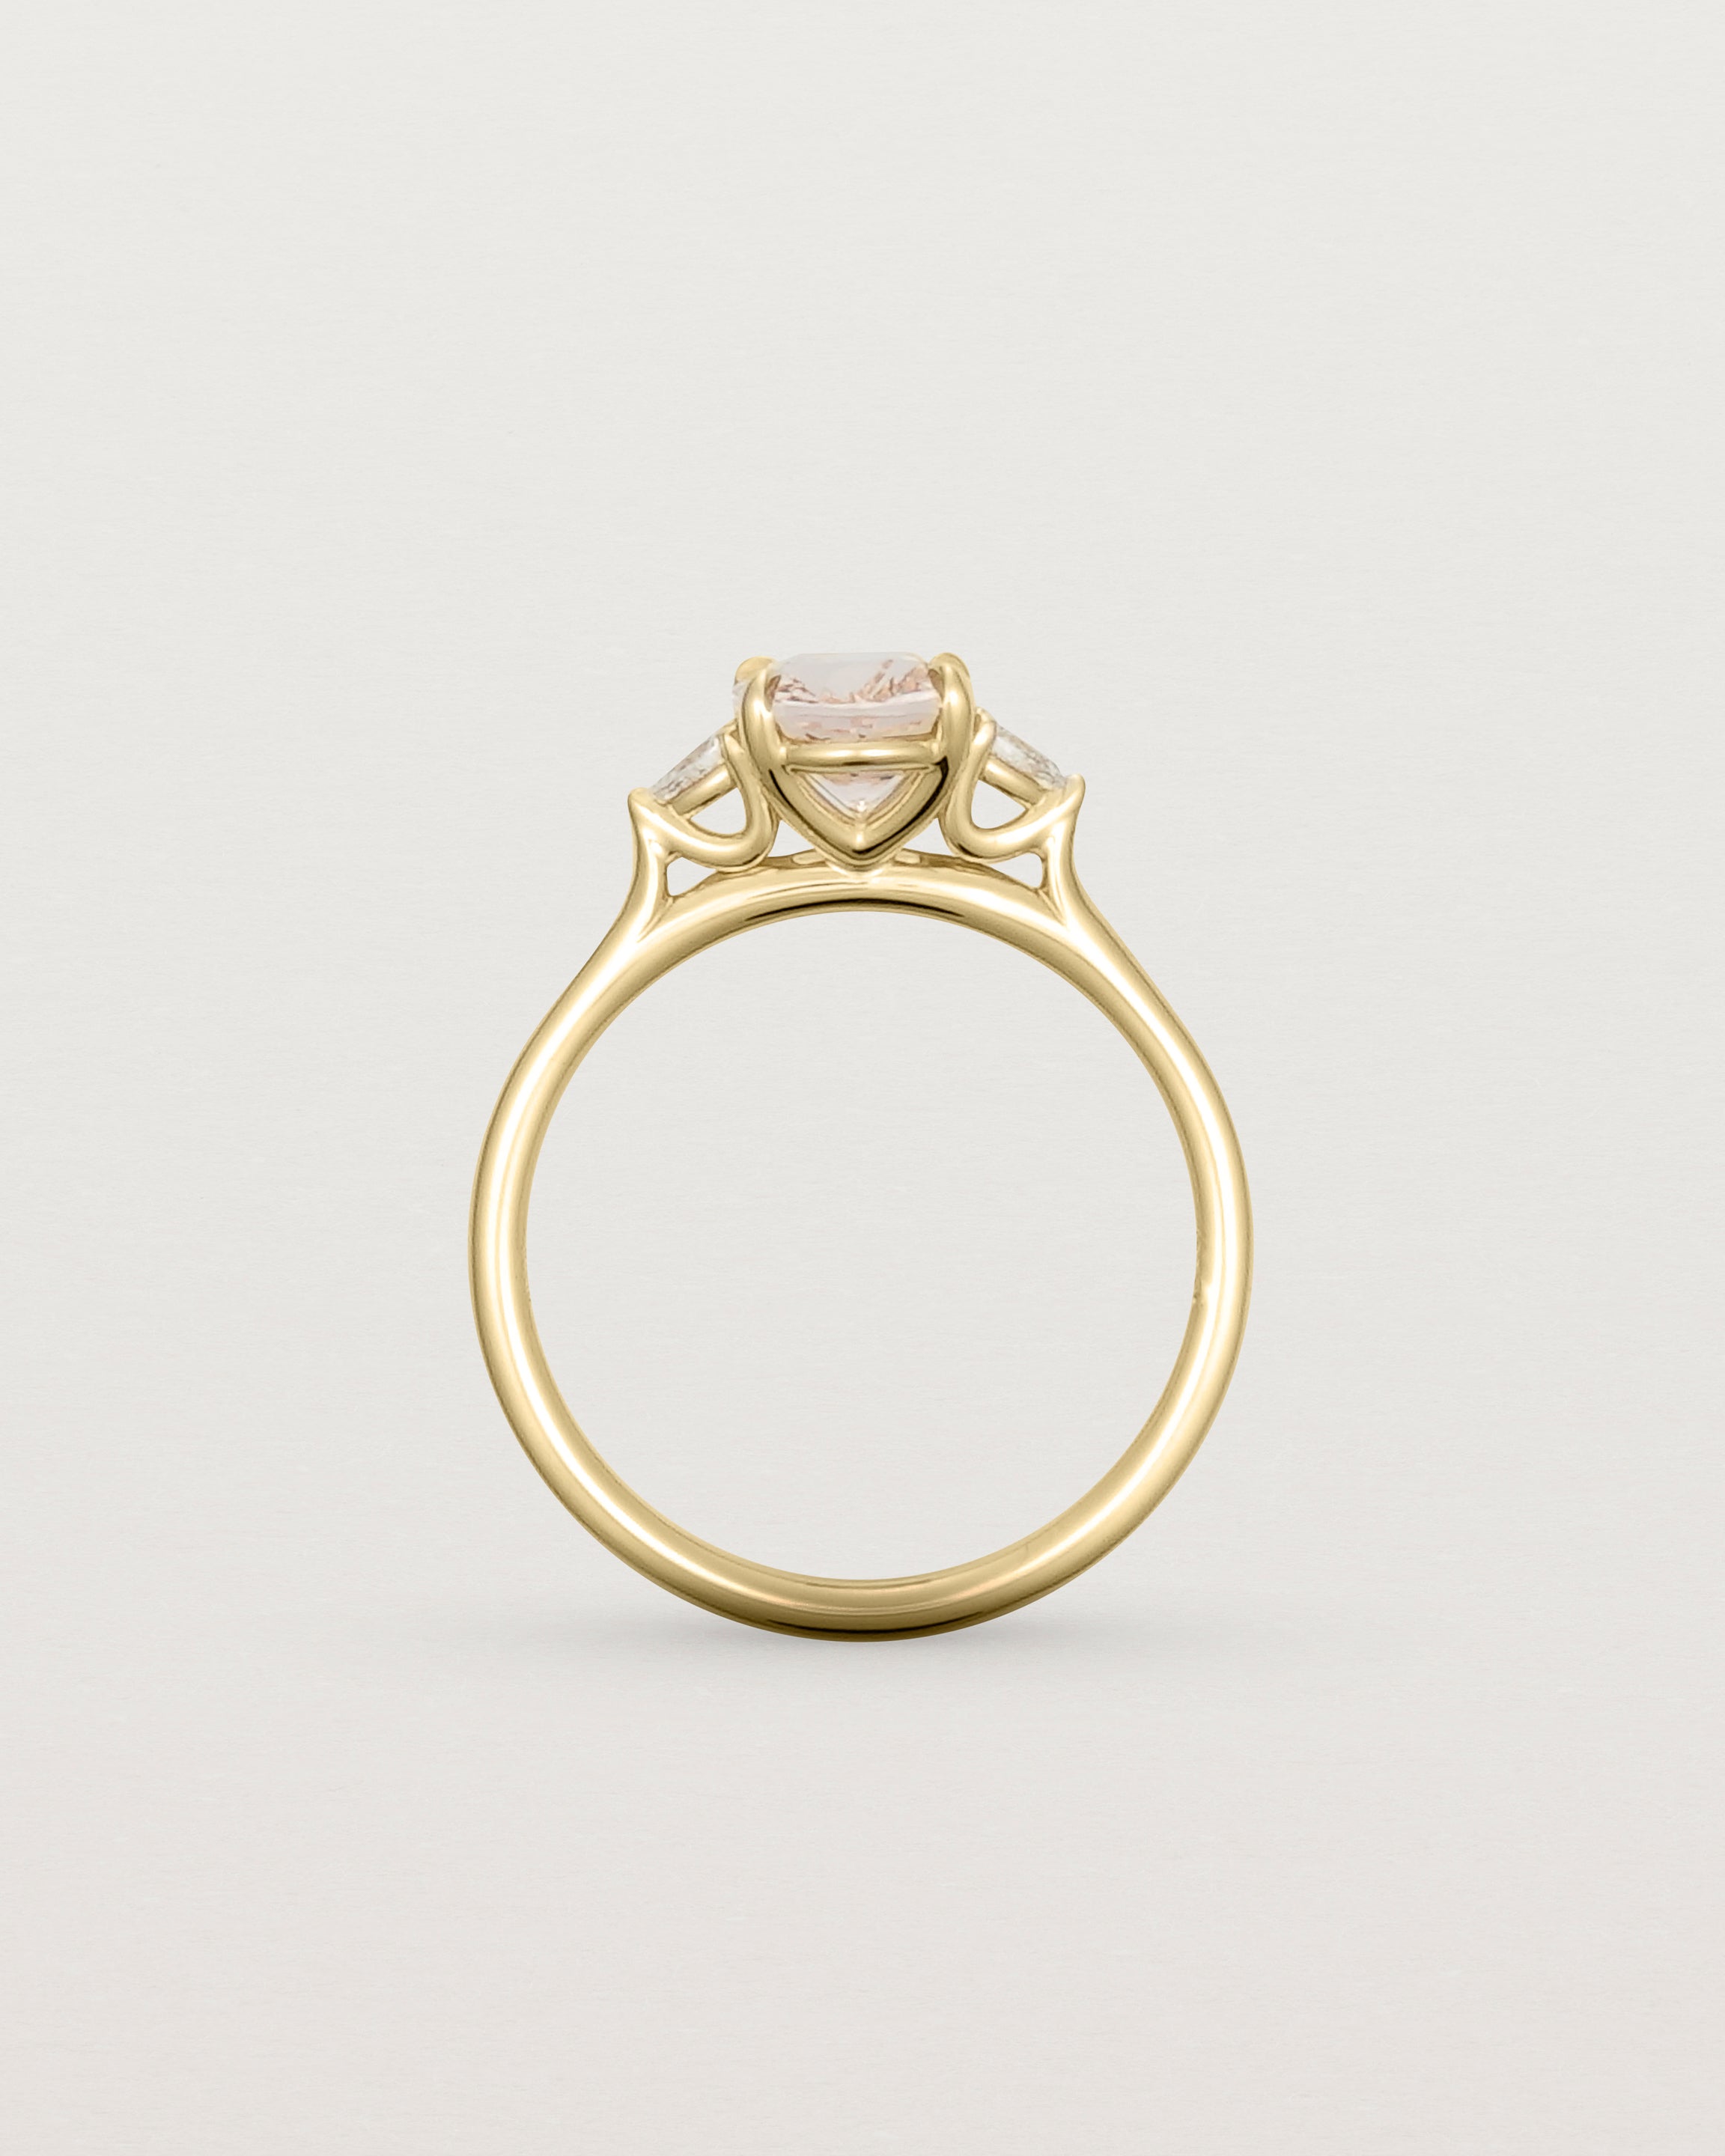 The side profile of an oval morganite adorned with white diamonds either side, featuring a sweeping setting and crafted in yellow gold